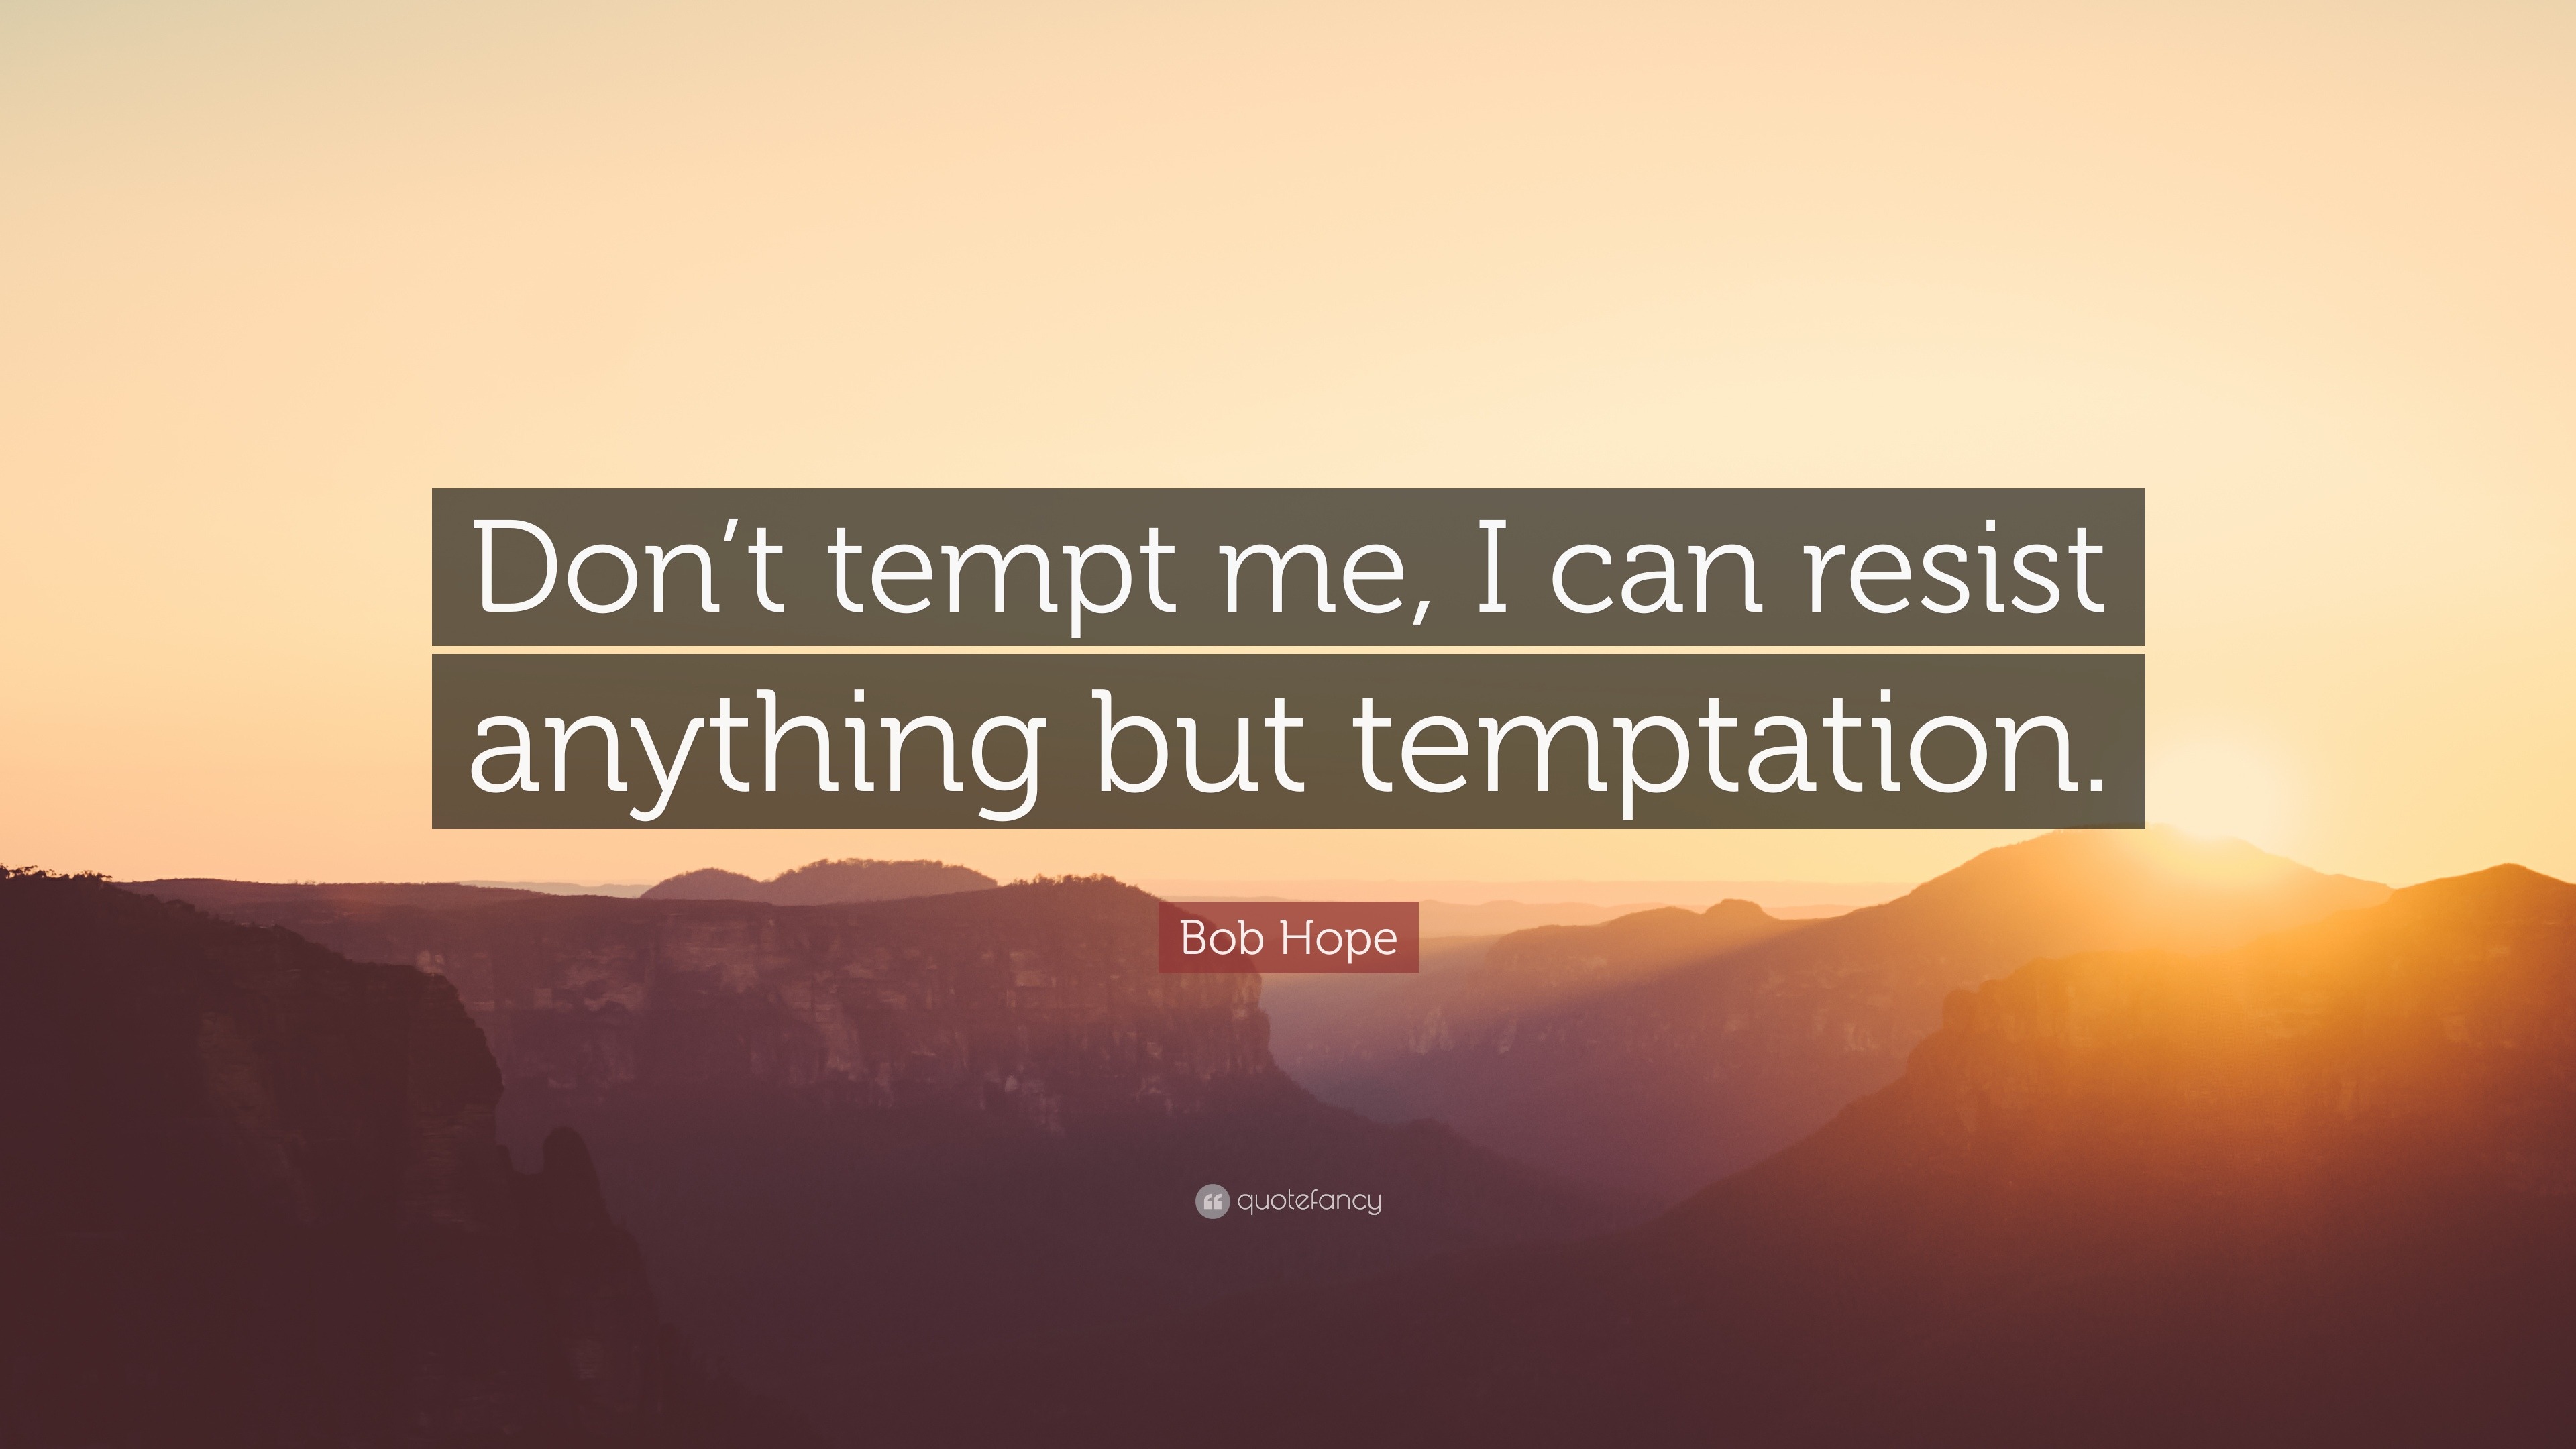 Bob Hope Quote: “Don't tempt me, I can resist anything but